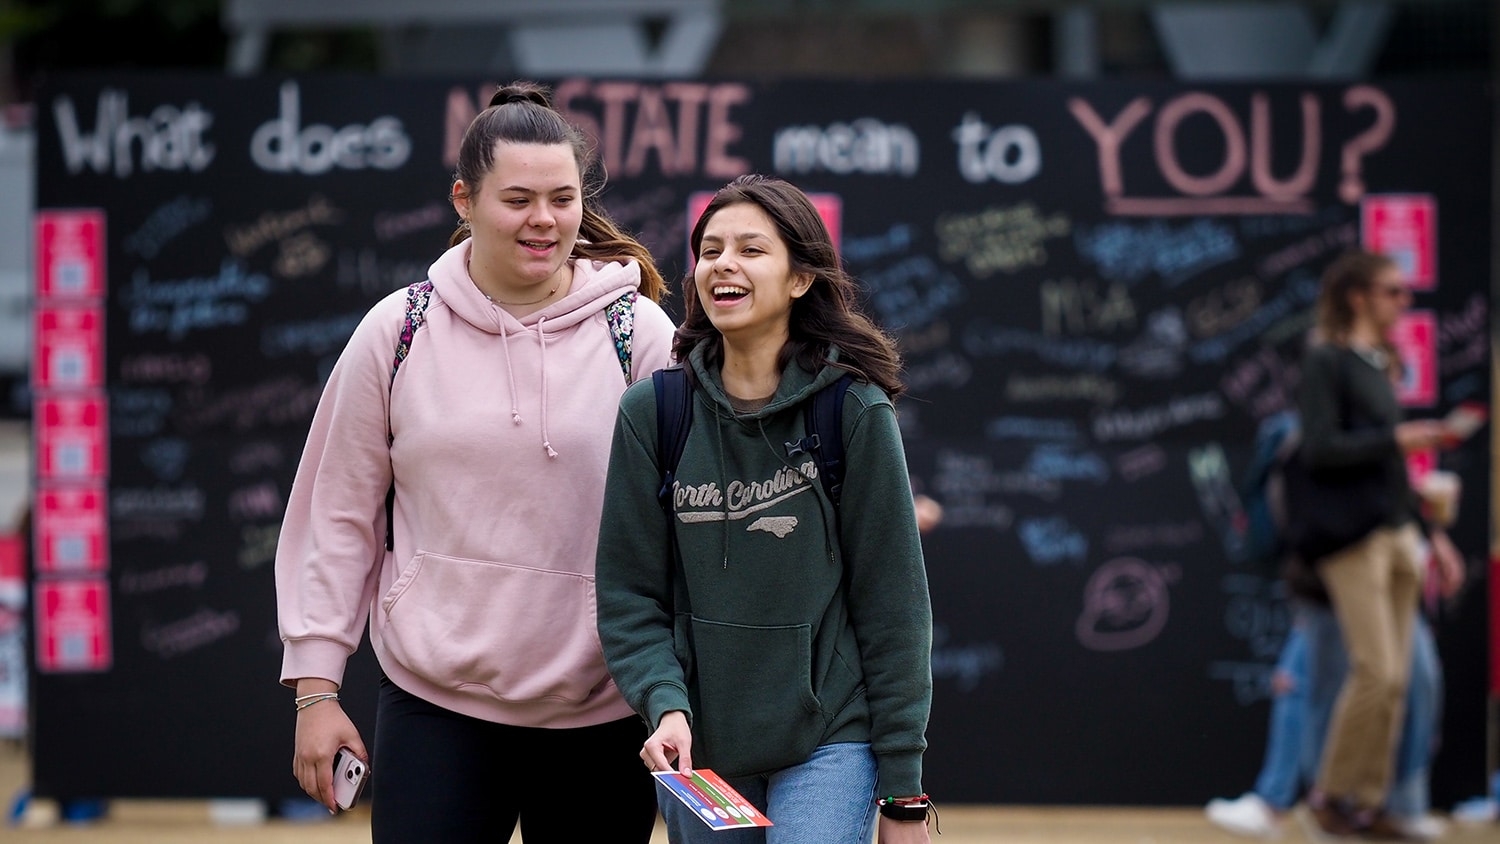 Two students laugh together while walking in front of a chalkboard sign that reads "What does NC State mean to you?" with hand written comments below the question.